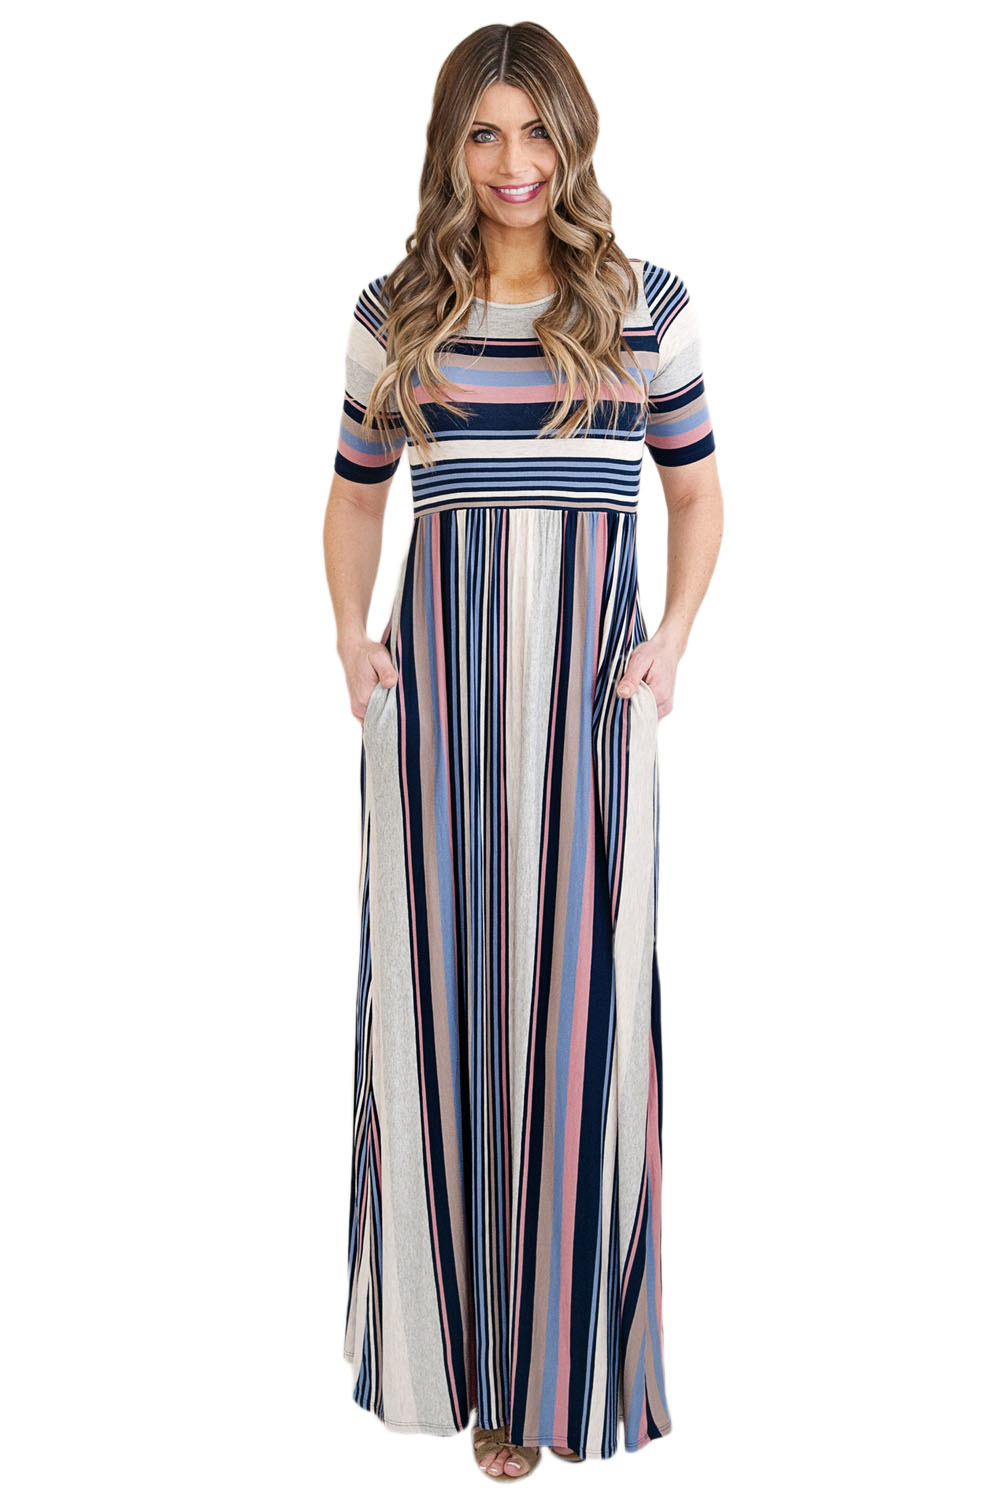 BY61660-5 Muted Multicolor Striped Half Sleeve Casual Maxi Dress